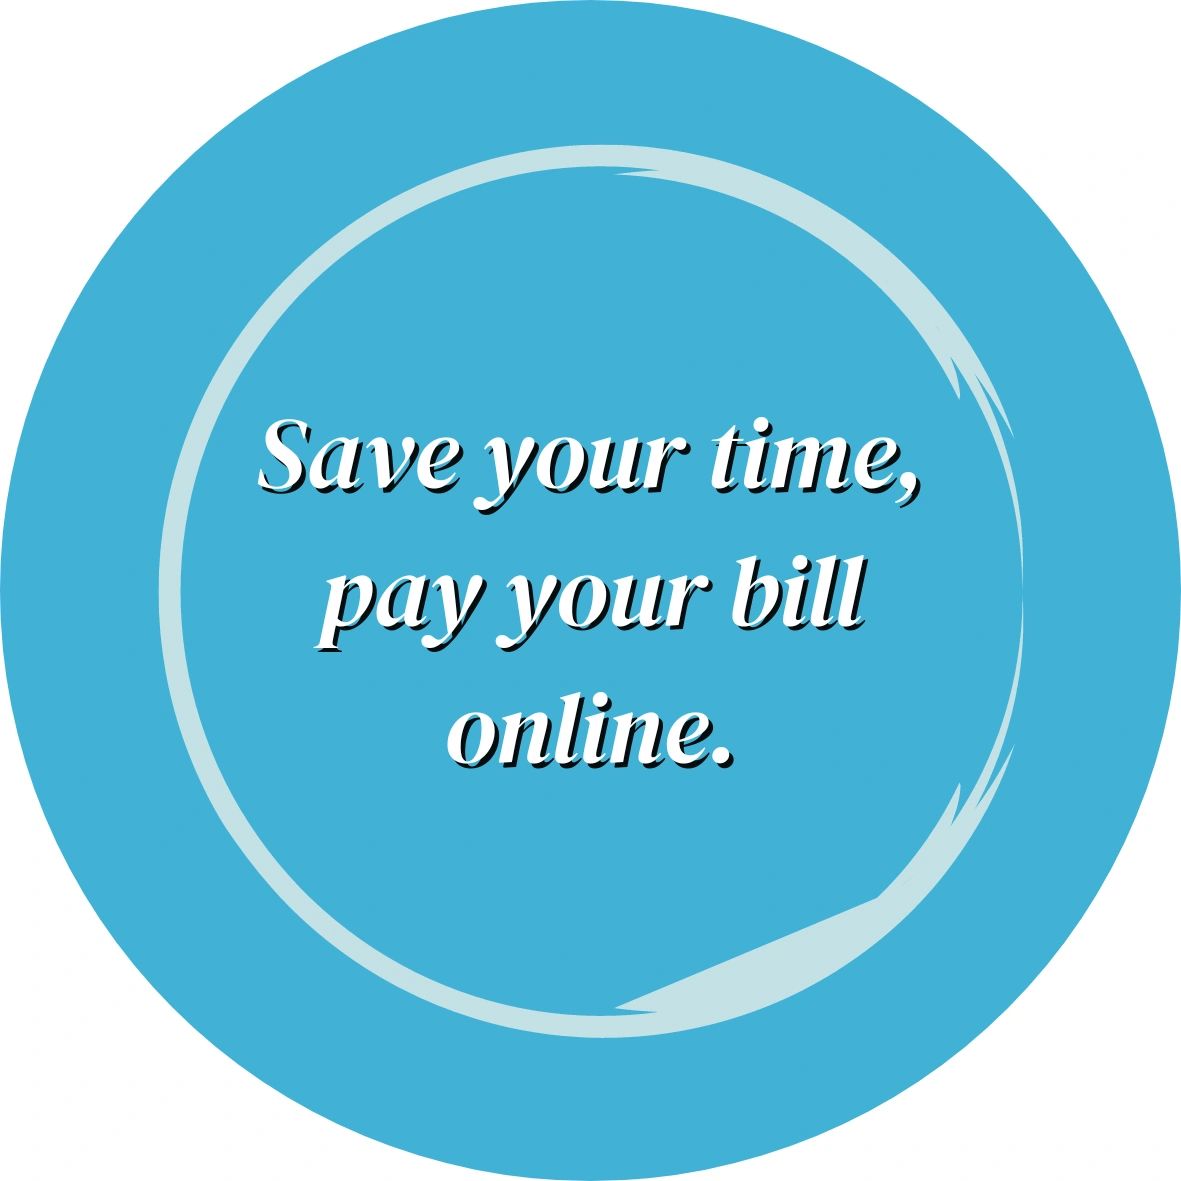 Save your time, pay your bill online.